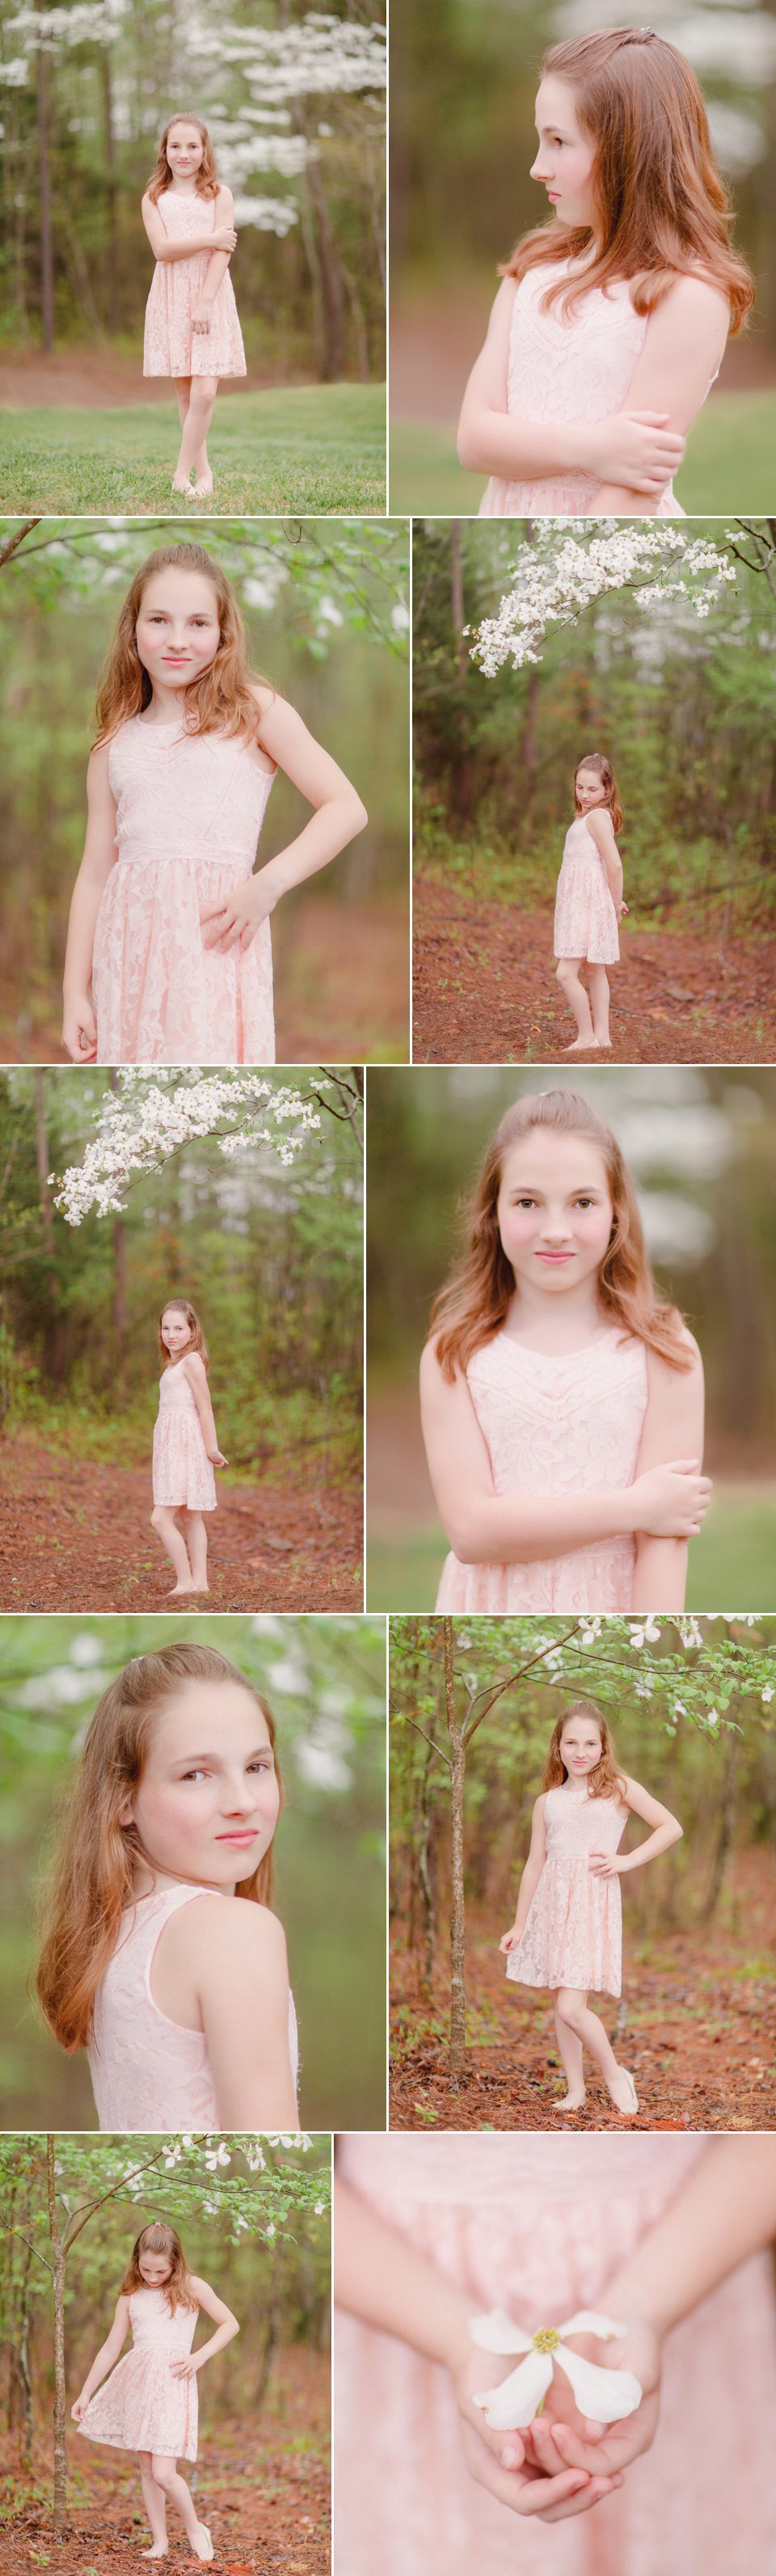 Portraits showing tween natural beauty in the Spring surrounded by dogwood trees in Athens, GA area.